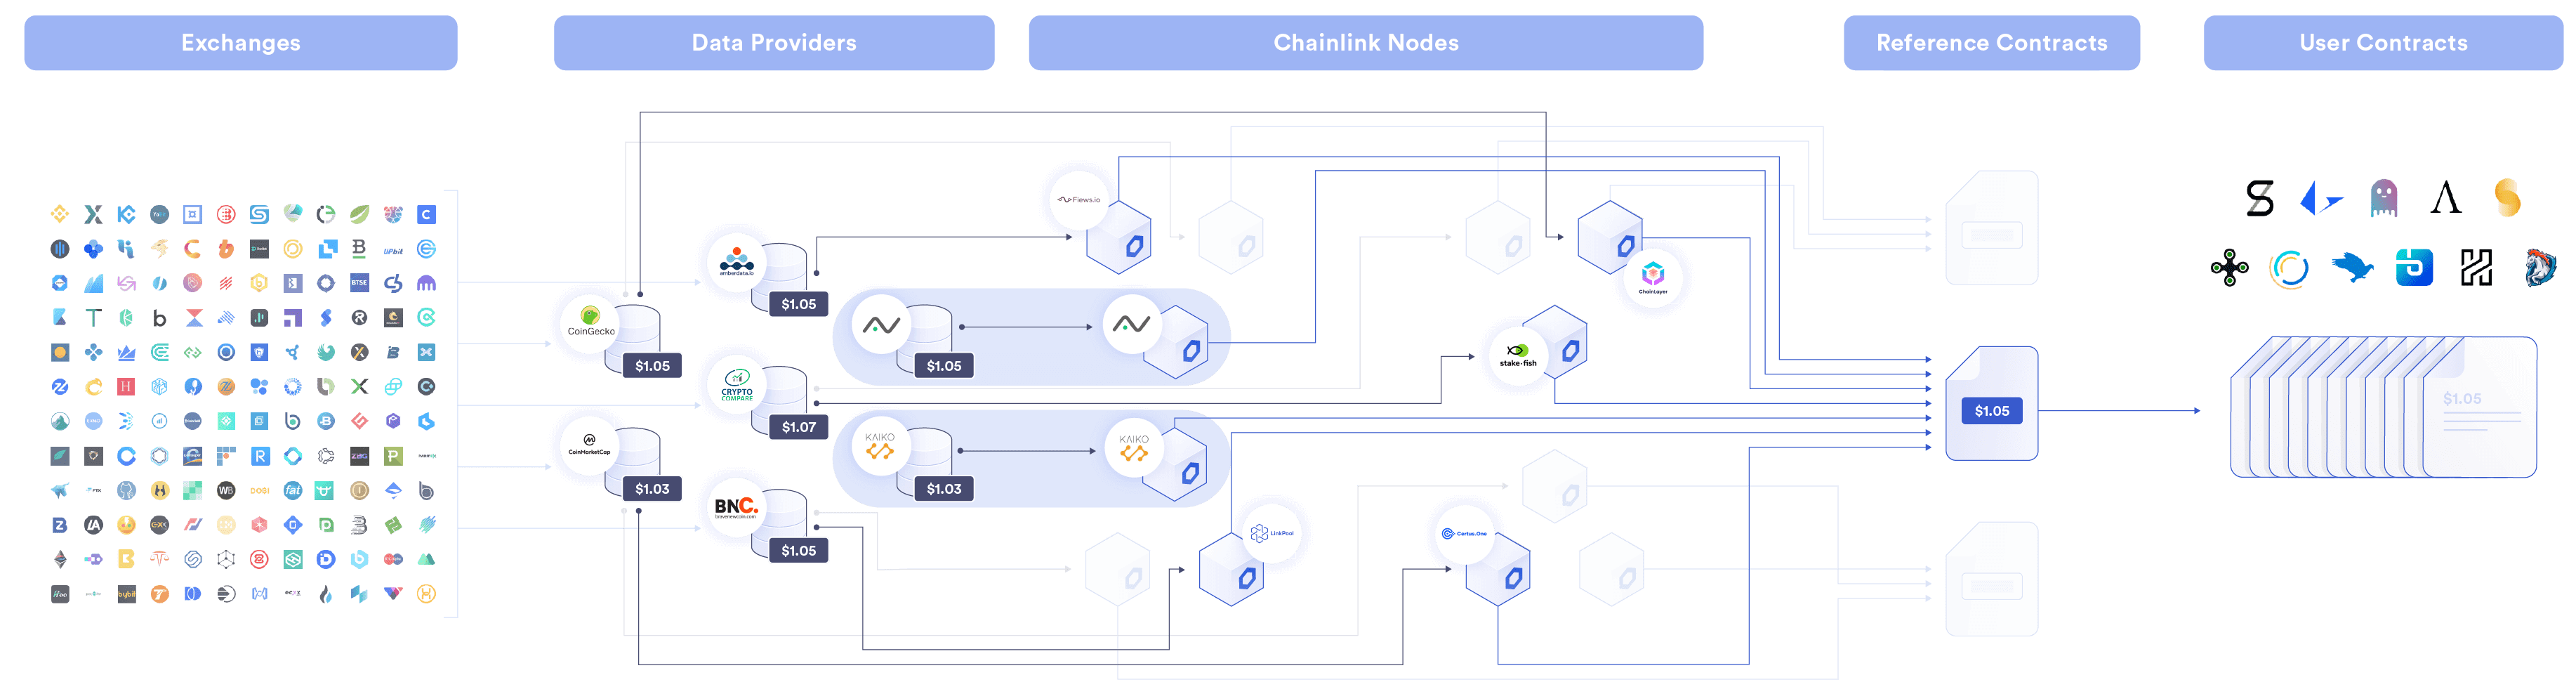 The end-to-end process of Chainlink’s Price Reference Data contracts